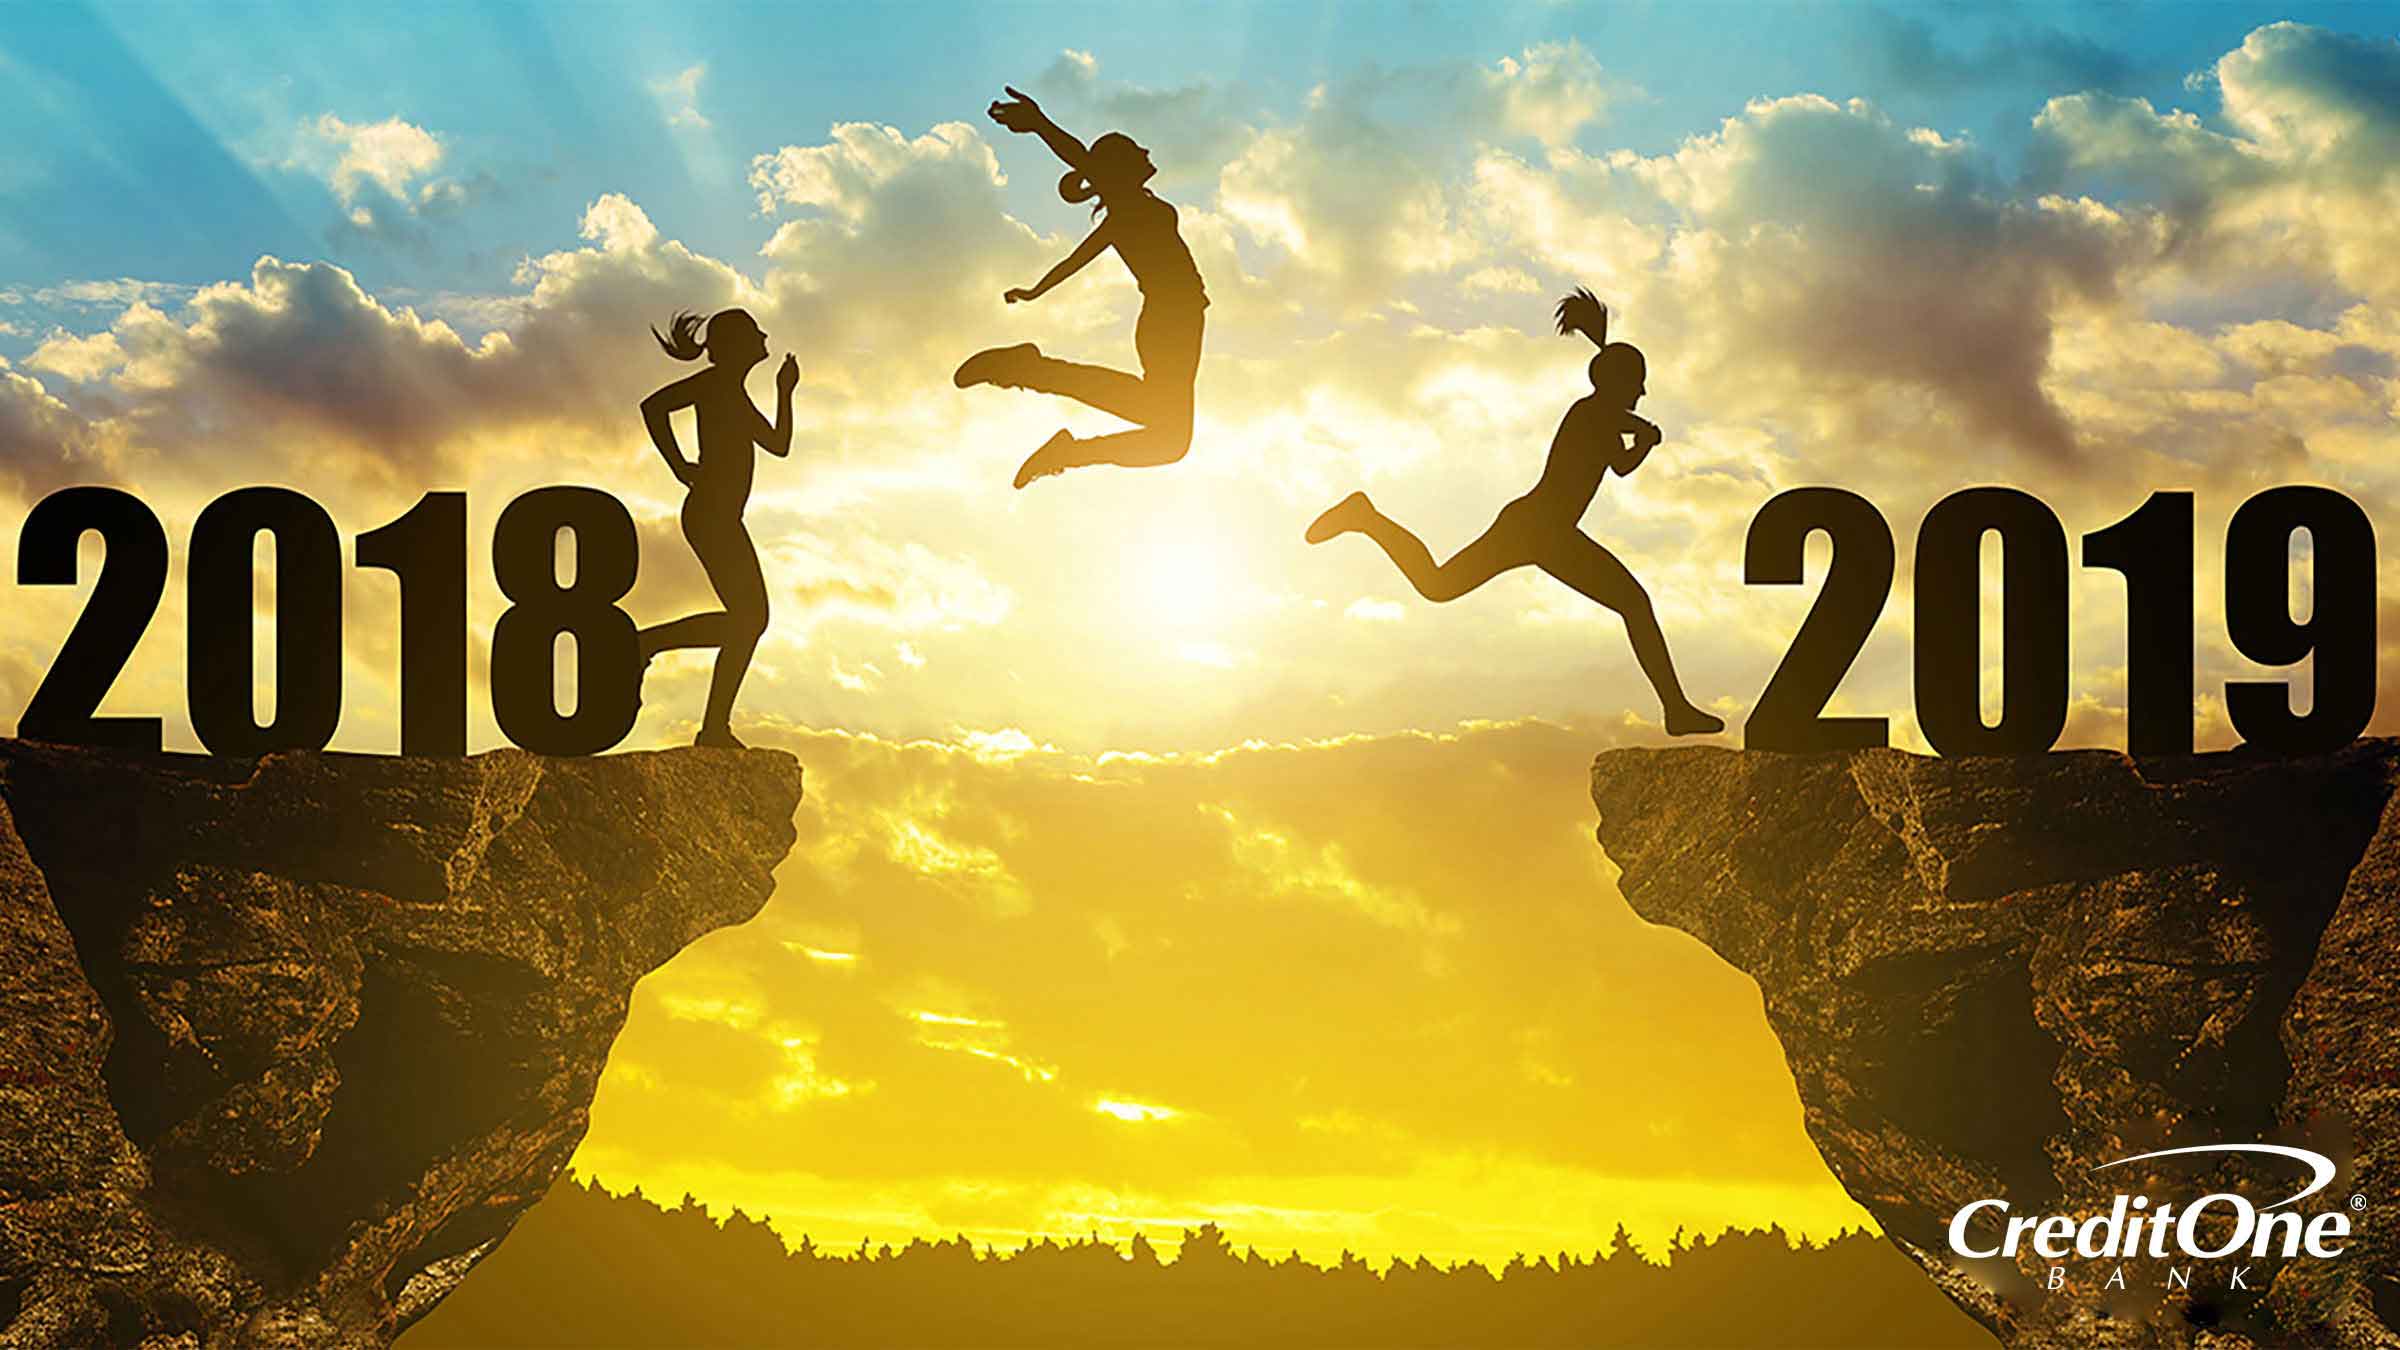 A silhouette of a woman making the jump from 2018 to 2019